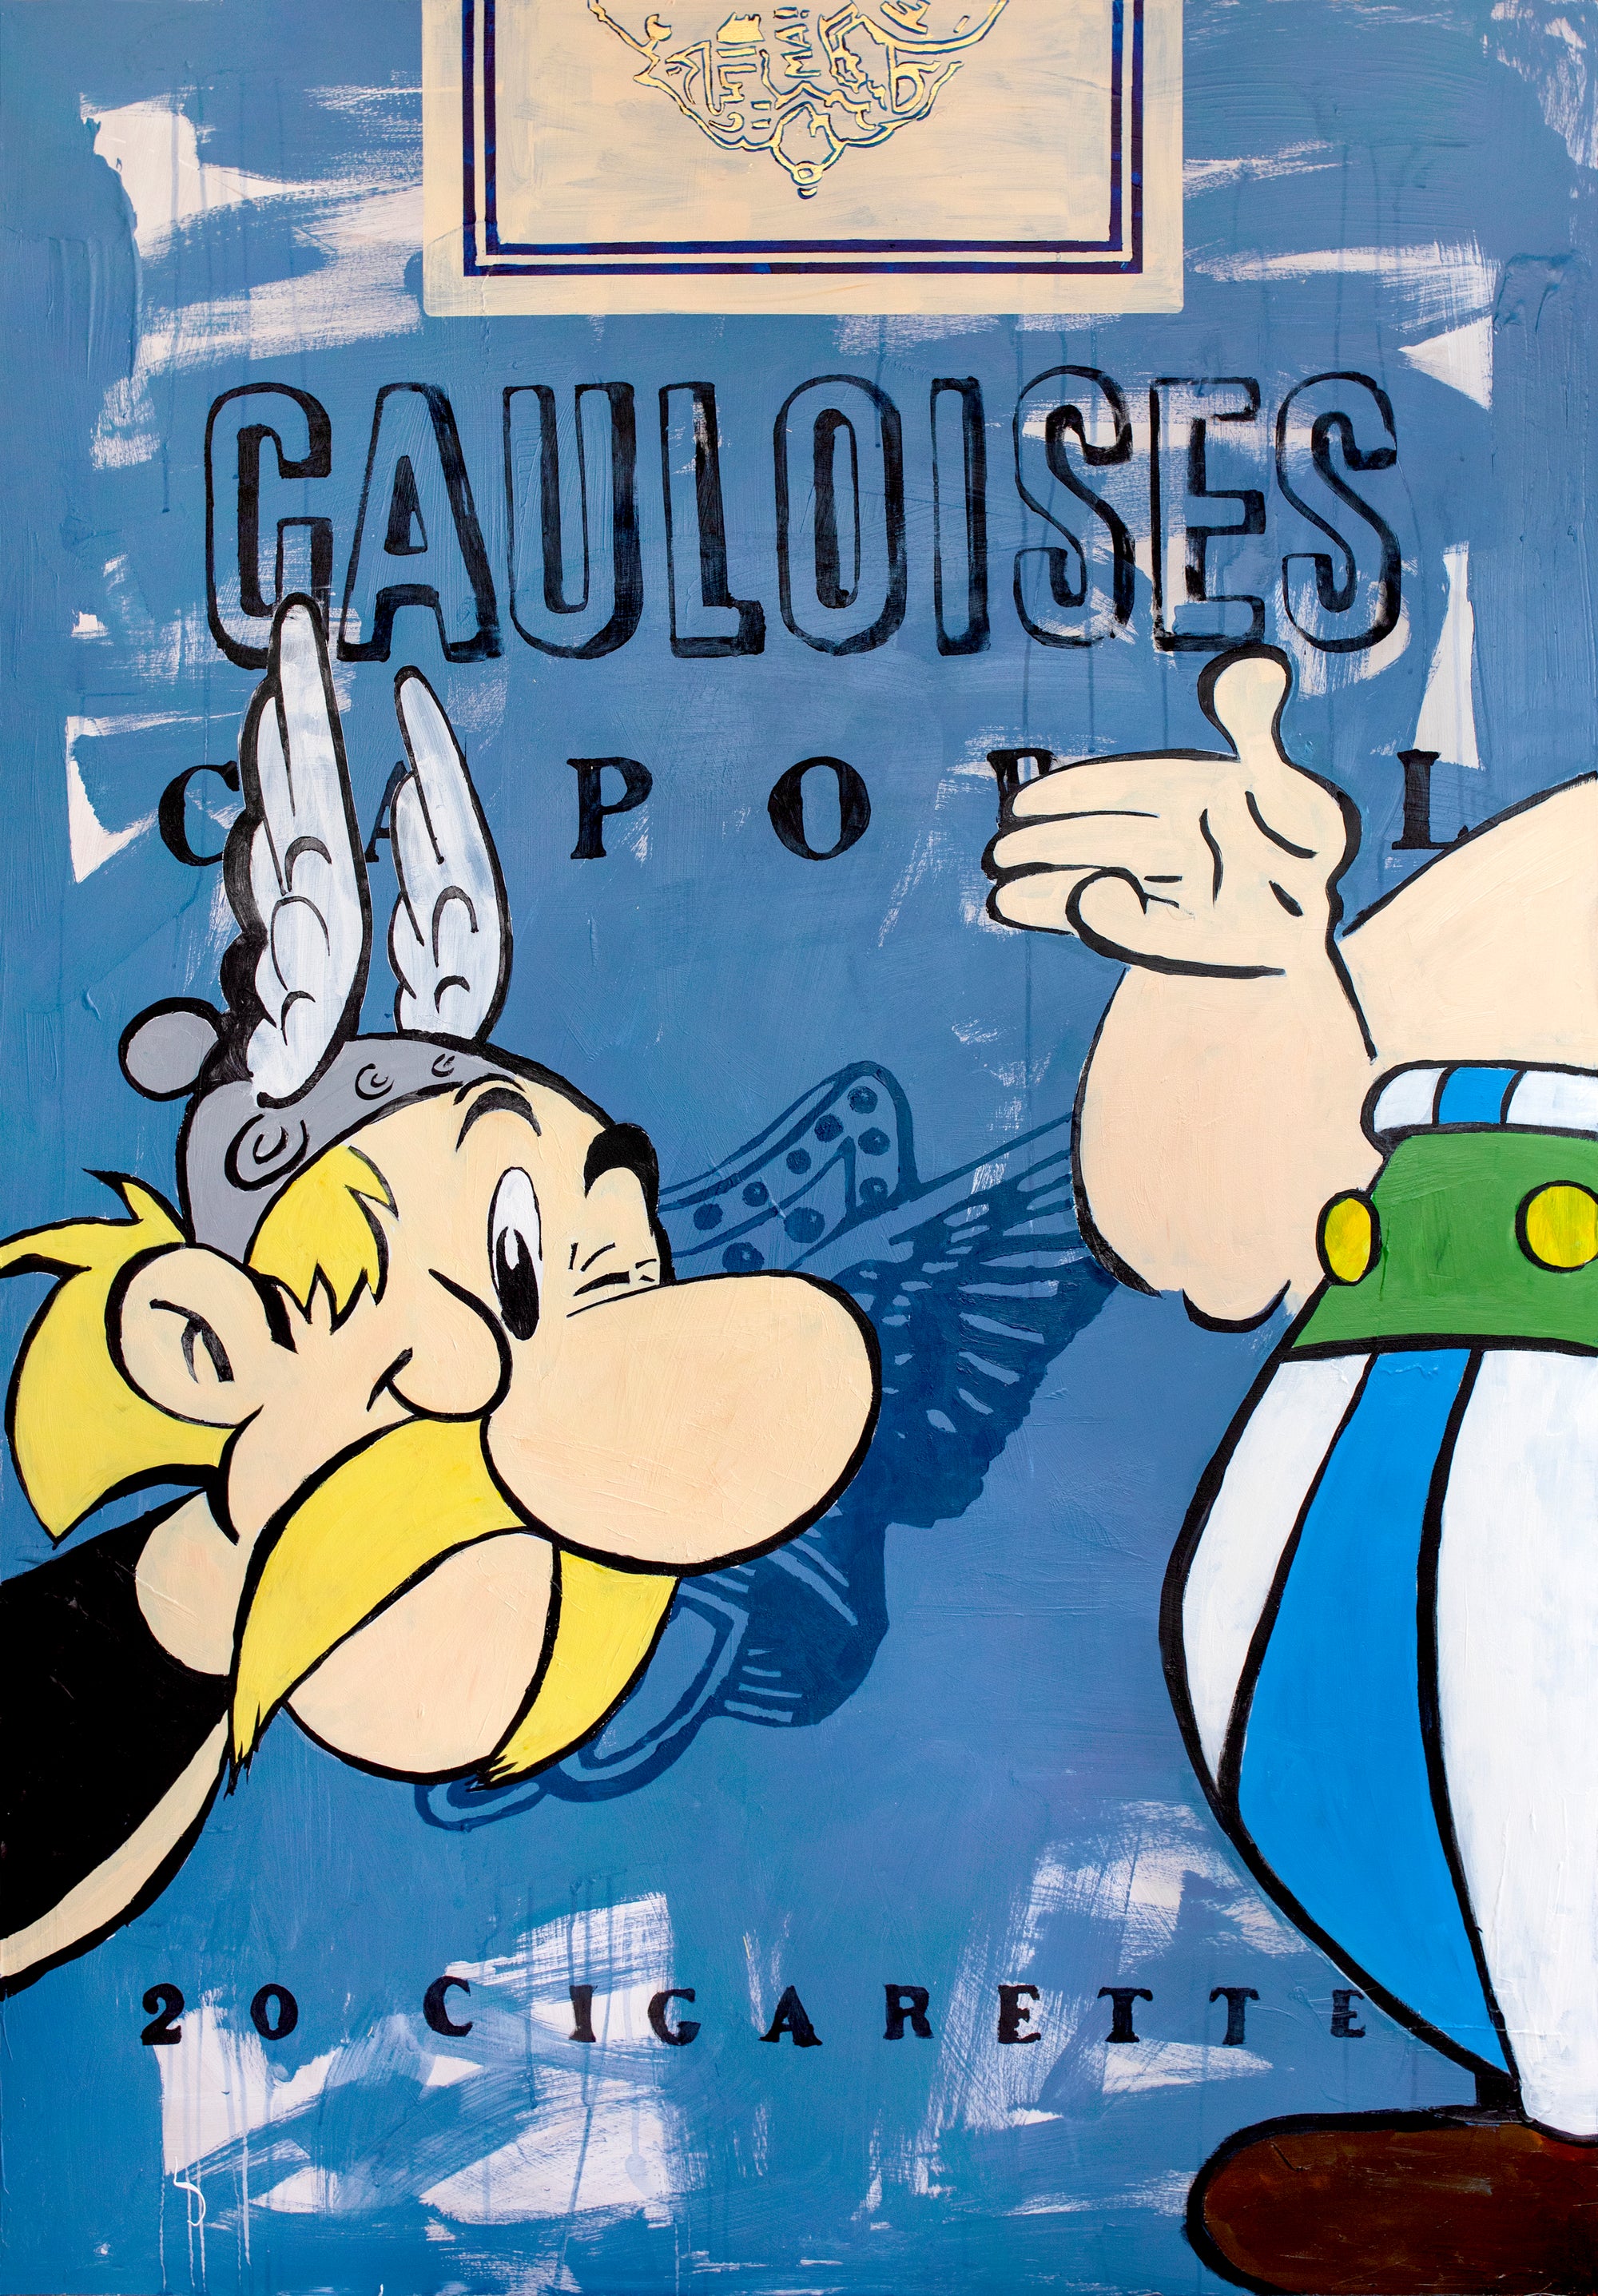 Asterix and Obelix on a Gauloises